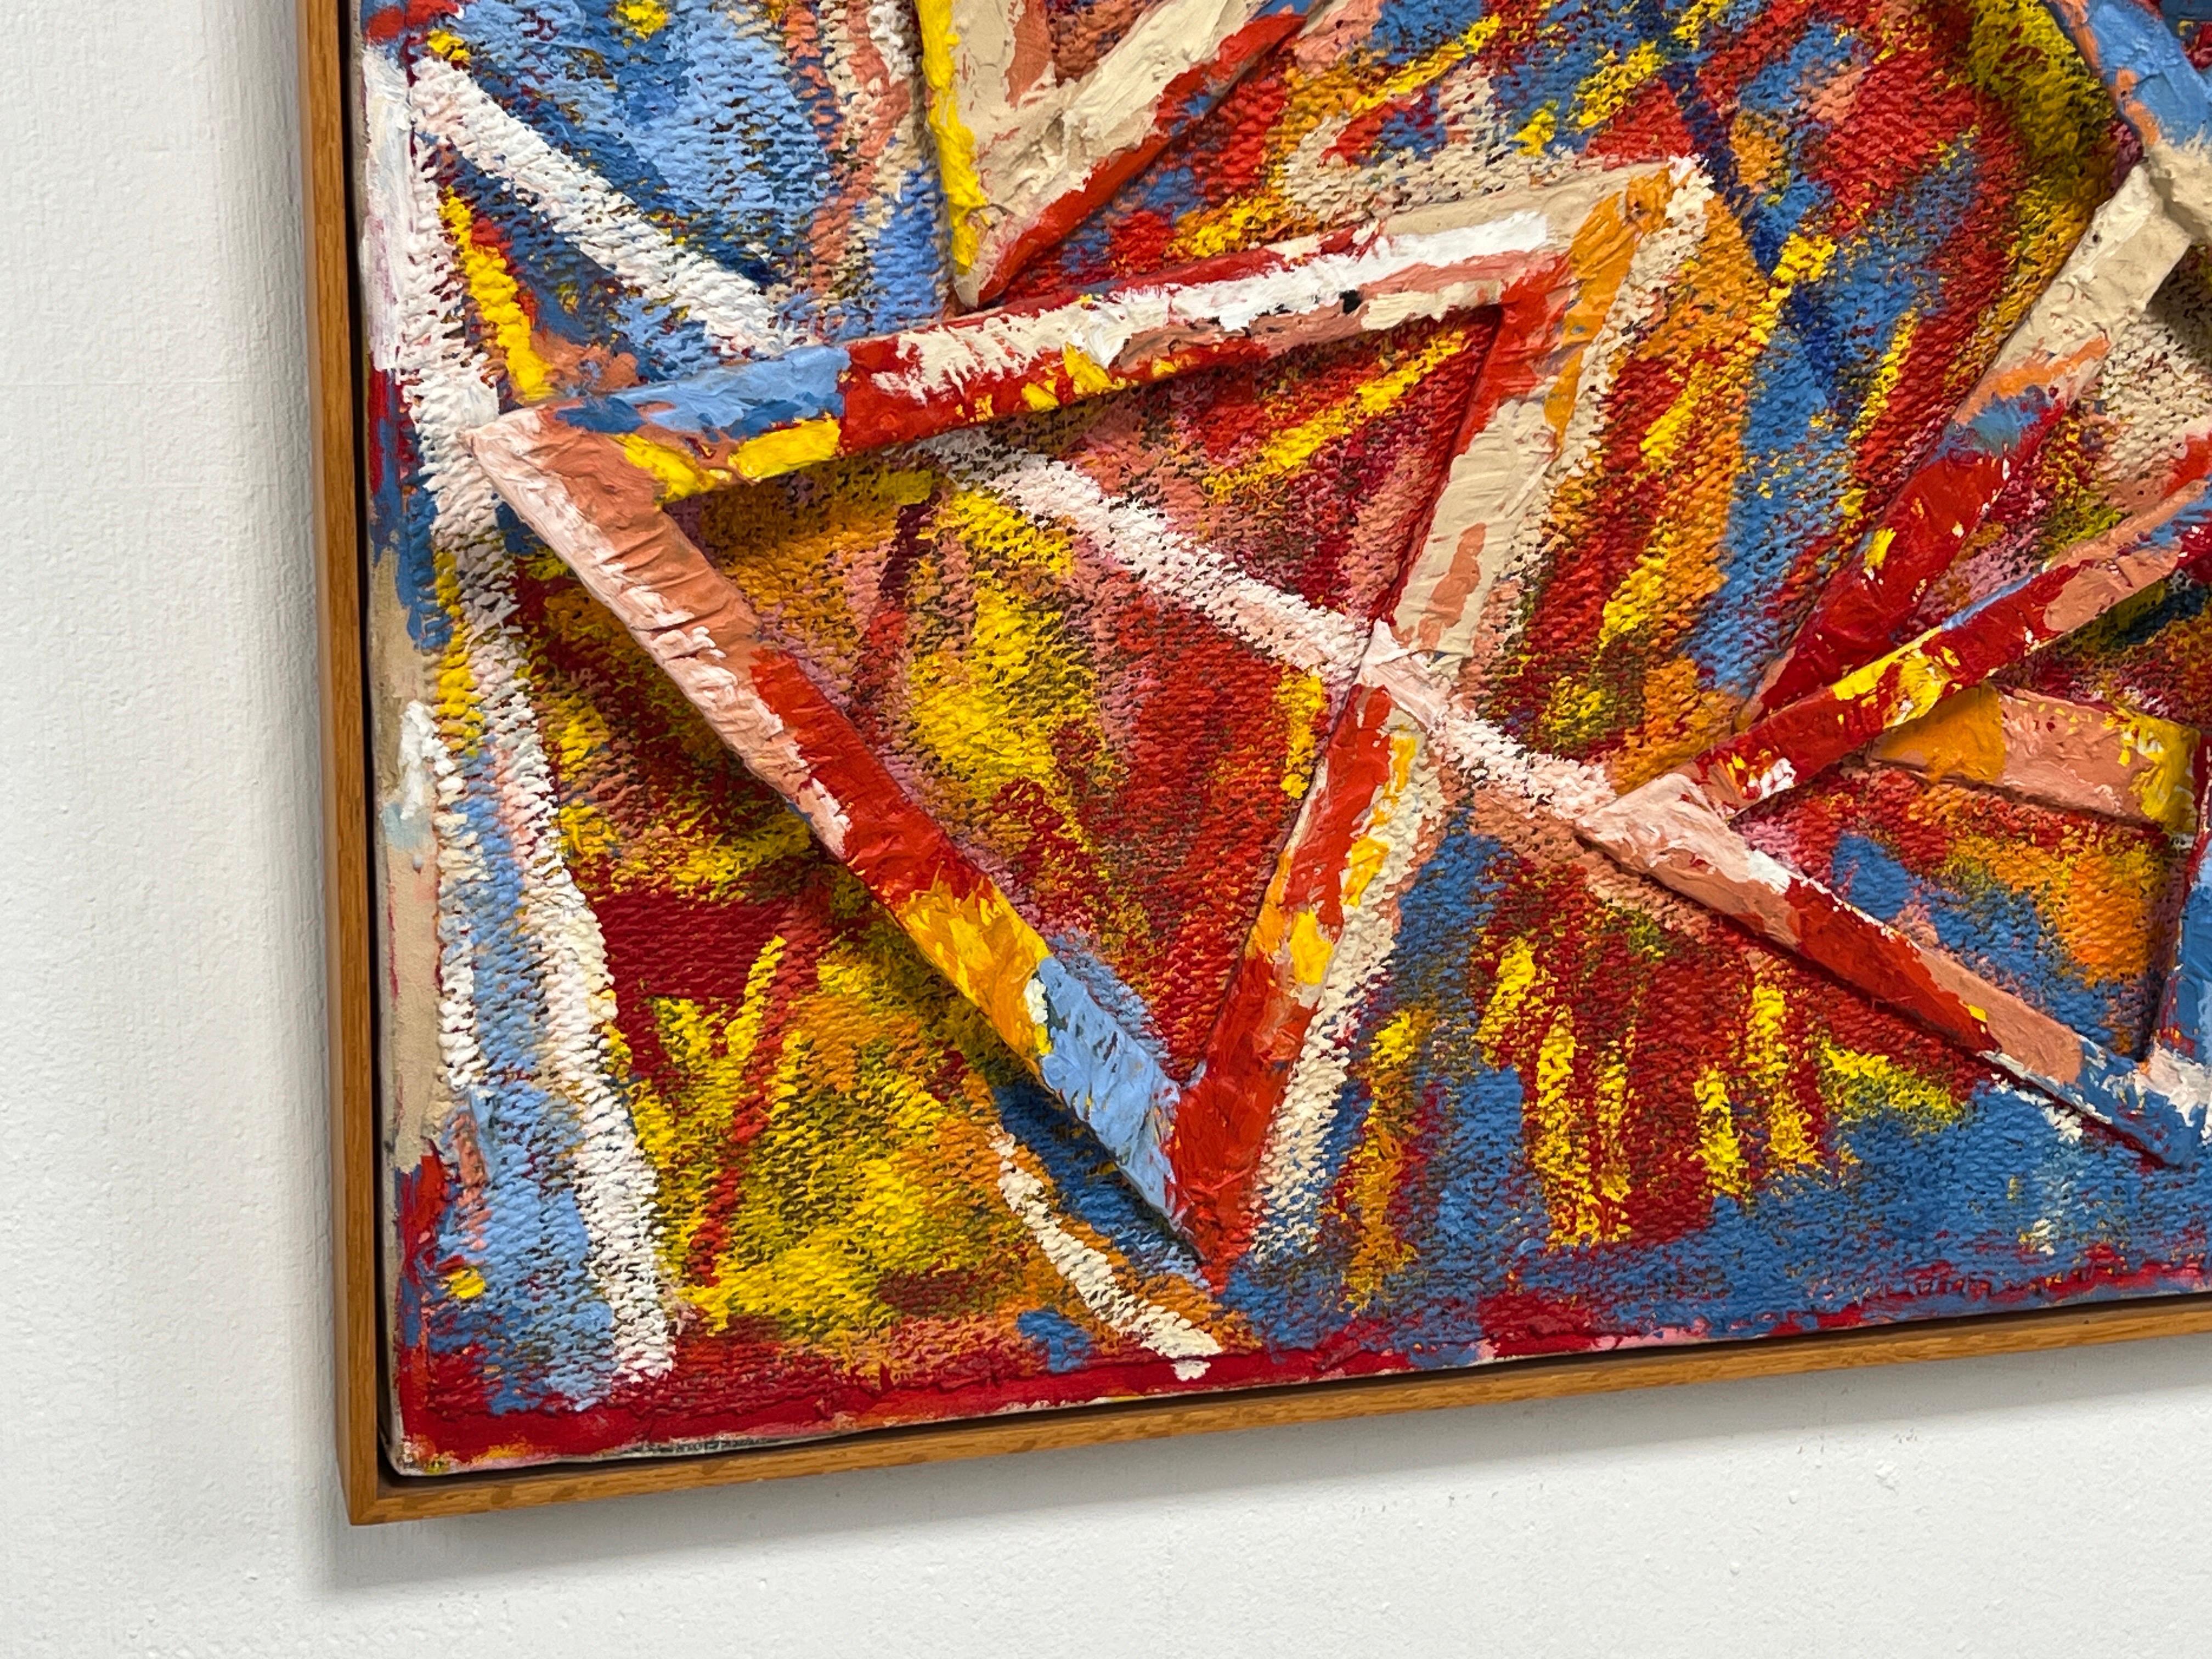 Doing the Best I Can, 3D Abstraction by Danny Williams For Sale 9